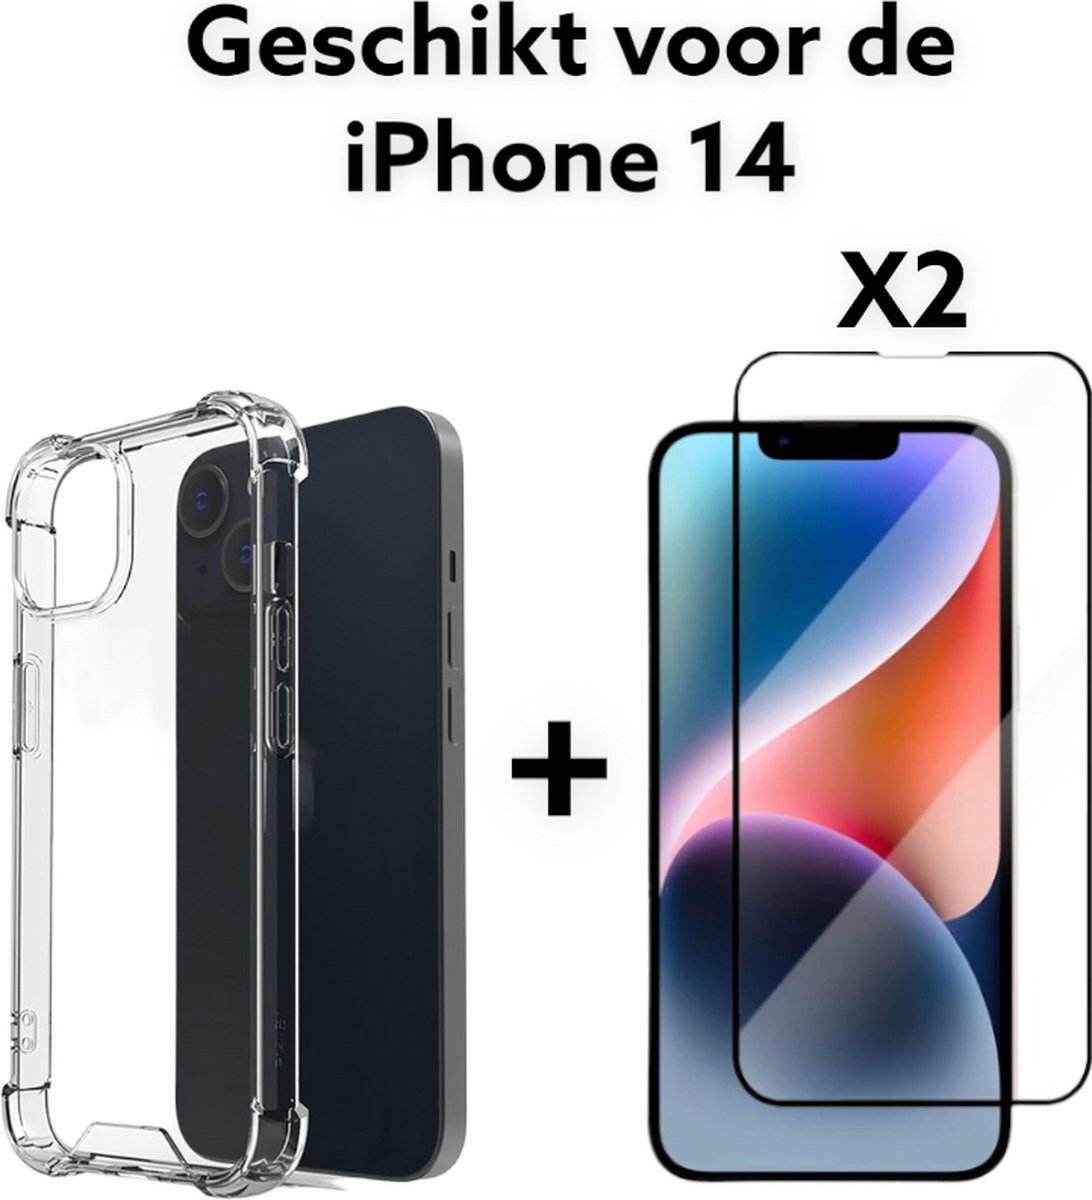 iPhone 14 Hoesje Transparant + x2 screenprotector - apple iPhone 14 Hoesje Anti Shock - iPhone 14 Anti Shock Case Antishock Shock Proof + x2 tempered glas 9H